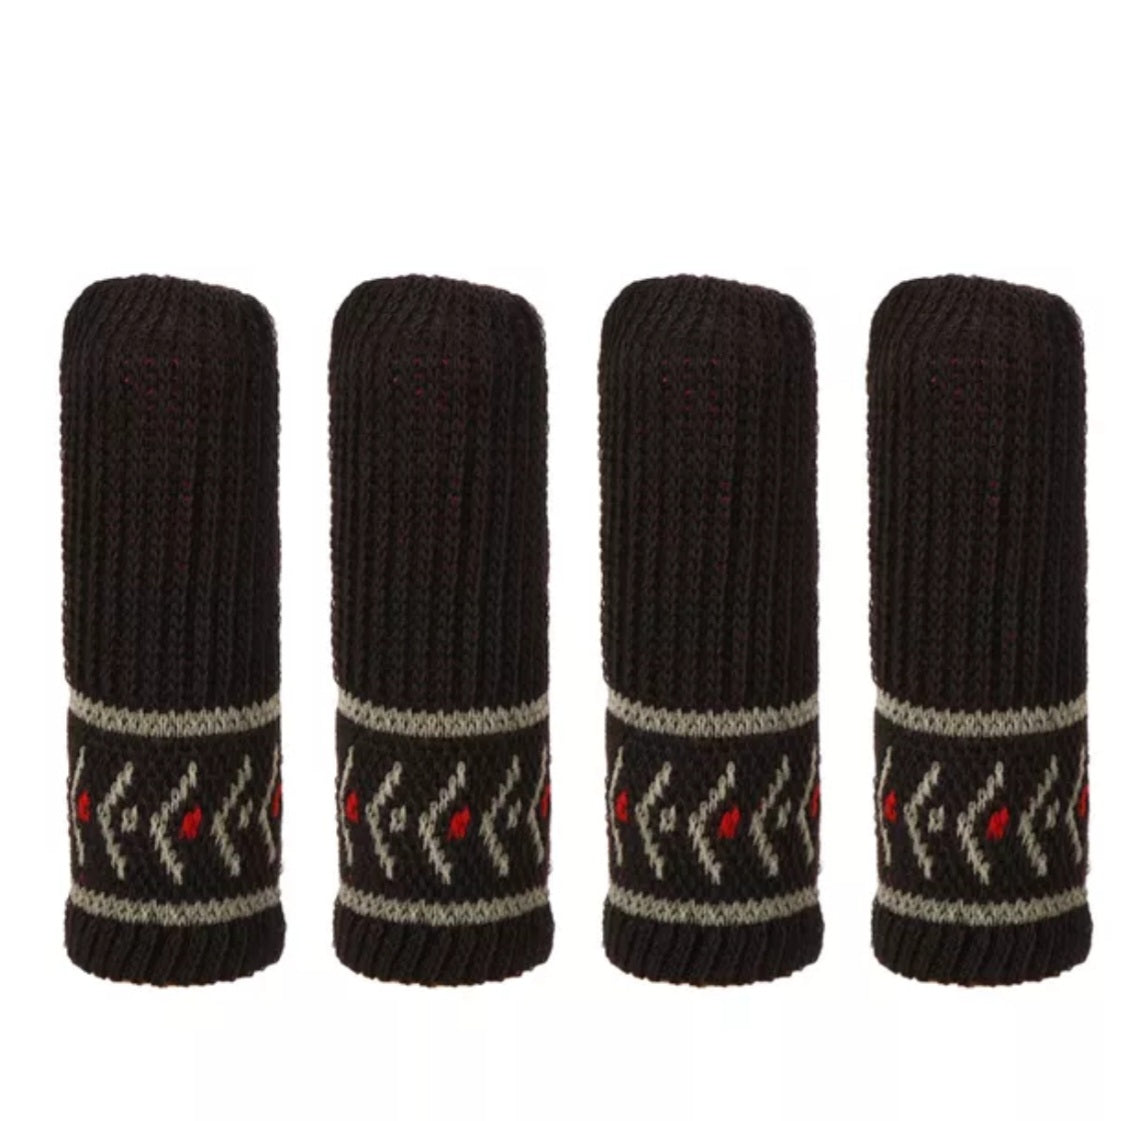 Chair and table leg socks scratch protection two colored set of 4 